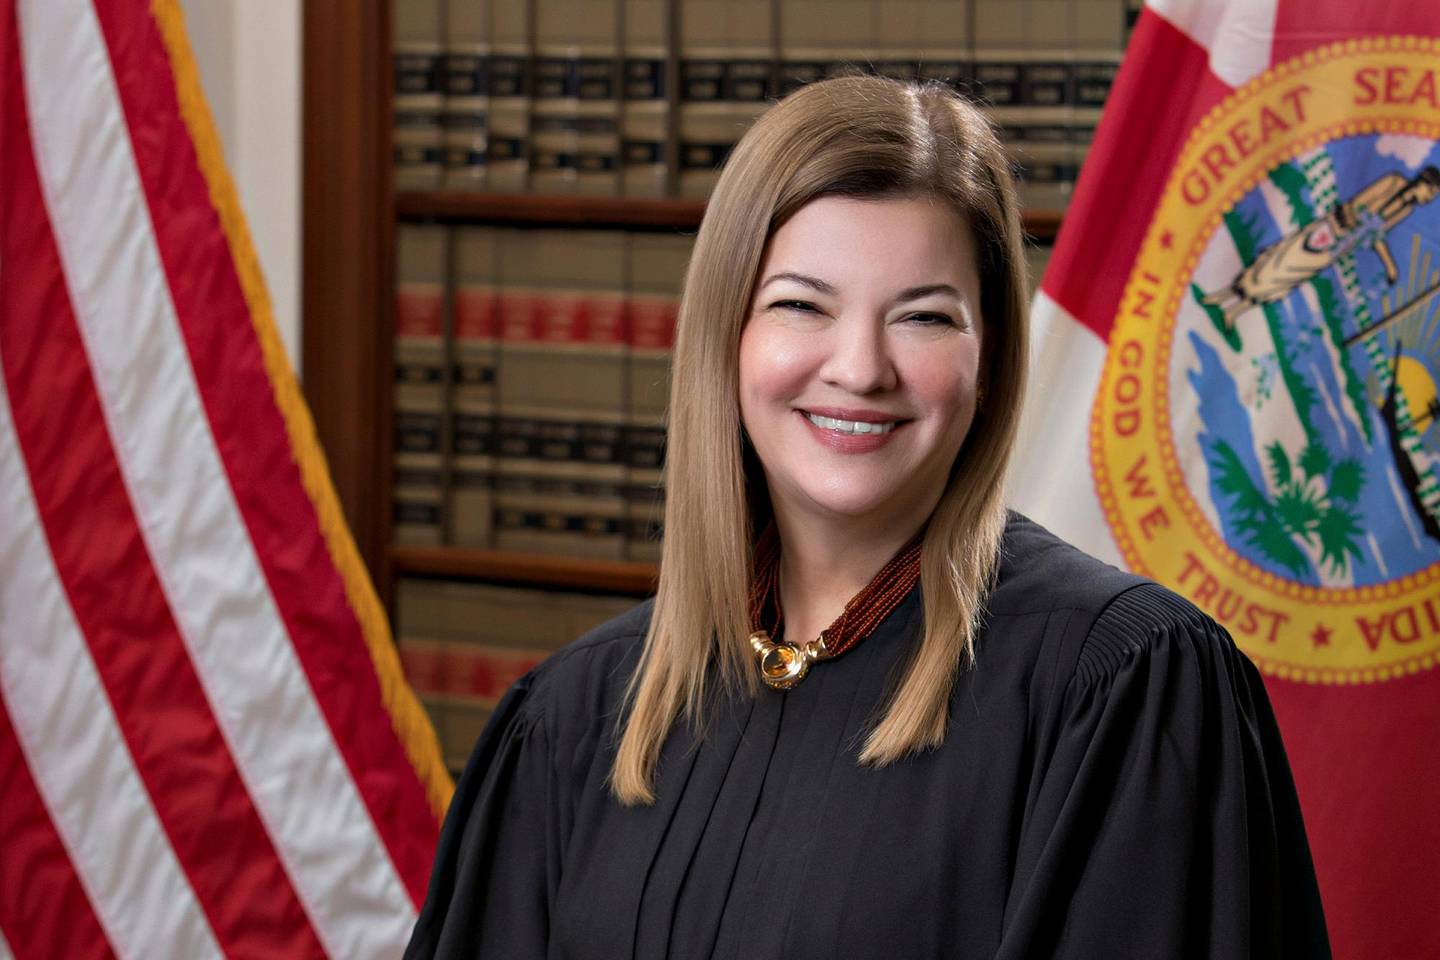 This handout photo obtained September 21, 2020 courtesy of the Florida Supreme Court shows Justice Barbara Lagoa. - President Donald Trump said September 21, 2020 he will nominate a replacement for the late Ruth Bader Ginsburg on the Supreme Court at the end of this week and insisted that the Senate should vote before the coming election."I will announce it either Friday or Saturday and then the work begins, but hopefully it won't be too much work," Trump told Fox News.He confirmed that two women -- Judge Amy Coney Barrett and Judge Barbara Lagoa -- feature prominently on his short list, noting that Lagoa is a Hispanic-American from the vital electoral state of Florida. Lagoa is "excellent, she's Hispanic, she's a terrific woman," he said. "We love Florida." (Photo by Handout / Florida Supreme Court / AFP) / RESTRICTED TO EDITORIAL USE - MANDATORY CREDIT "AFP PHOTO /FLORIDA SUPREME COURT/HANDOUT " - NO MARKETING - NO ADVERTISING CAMPAIGNS - DISTRIBUTED AS A SERVICE TO CLIENTS